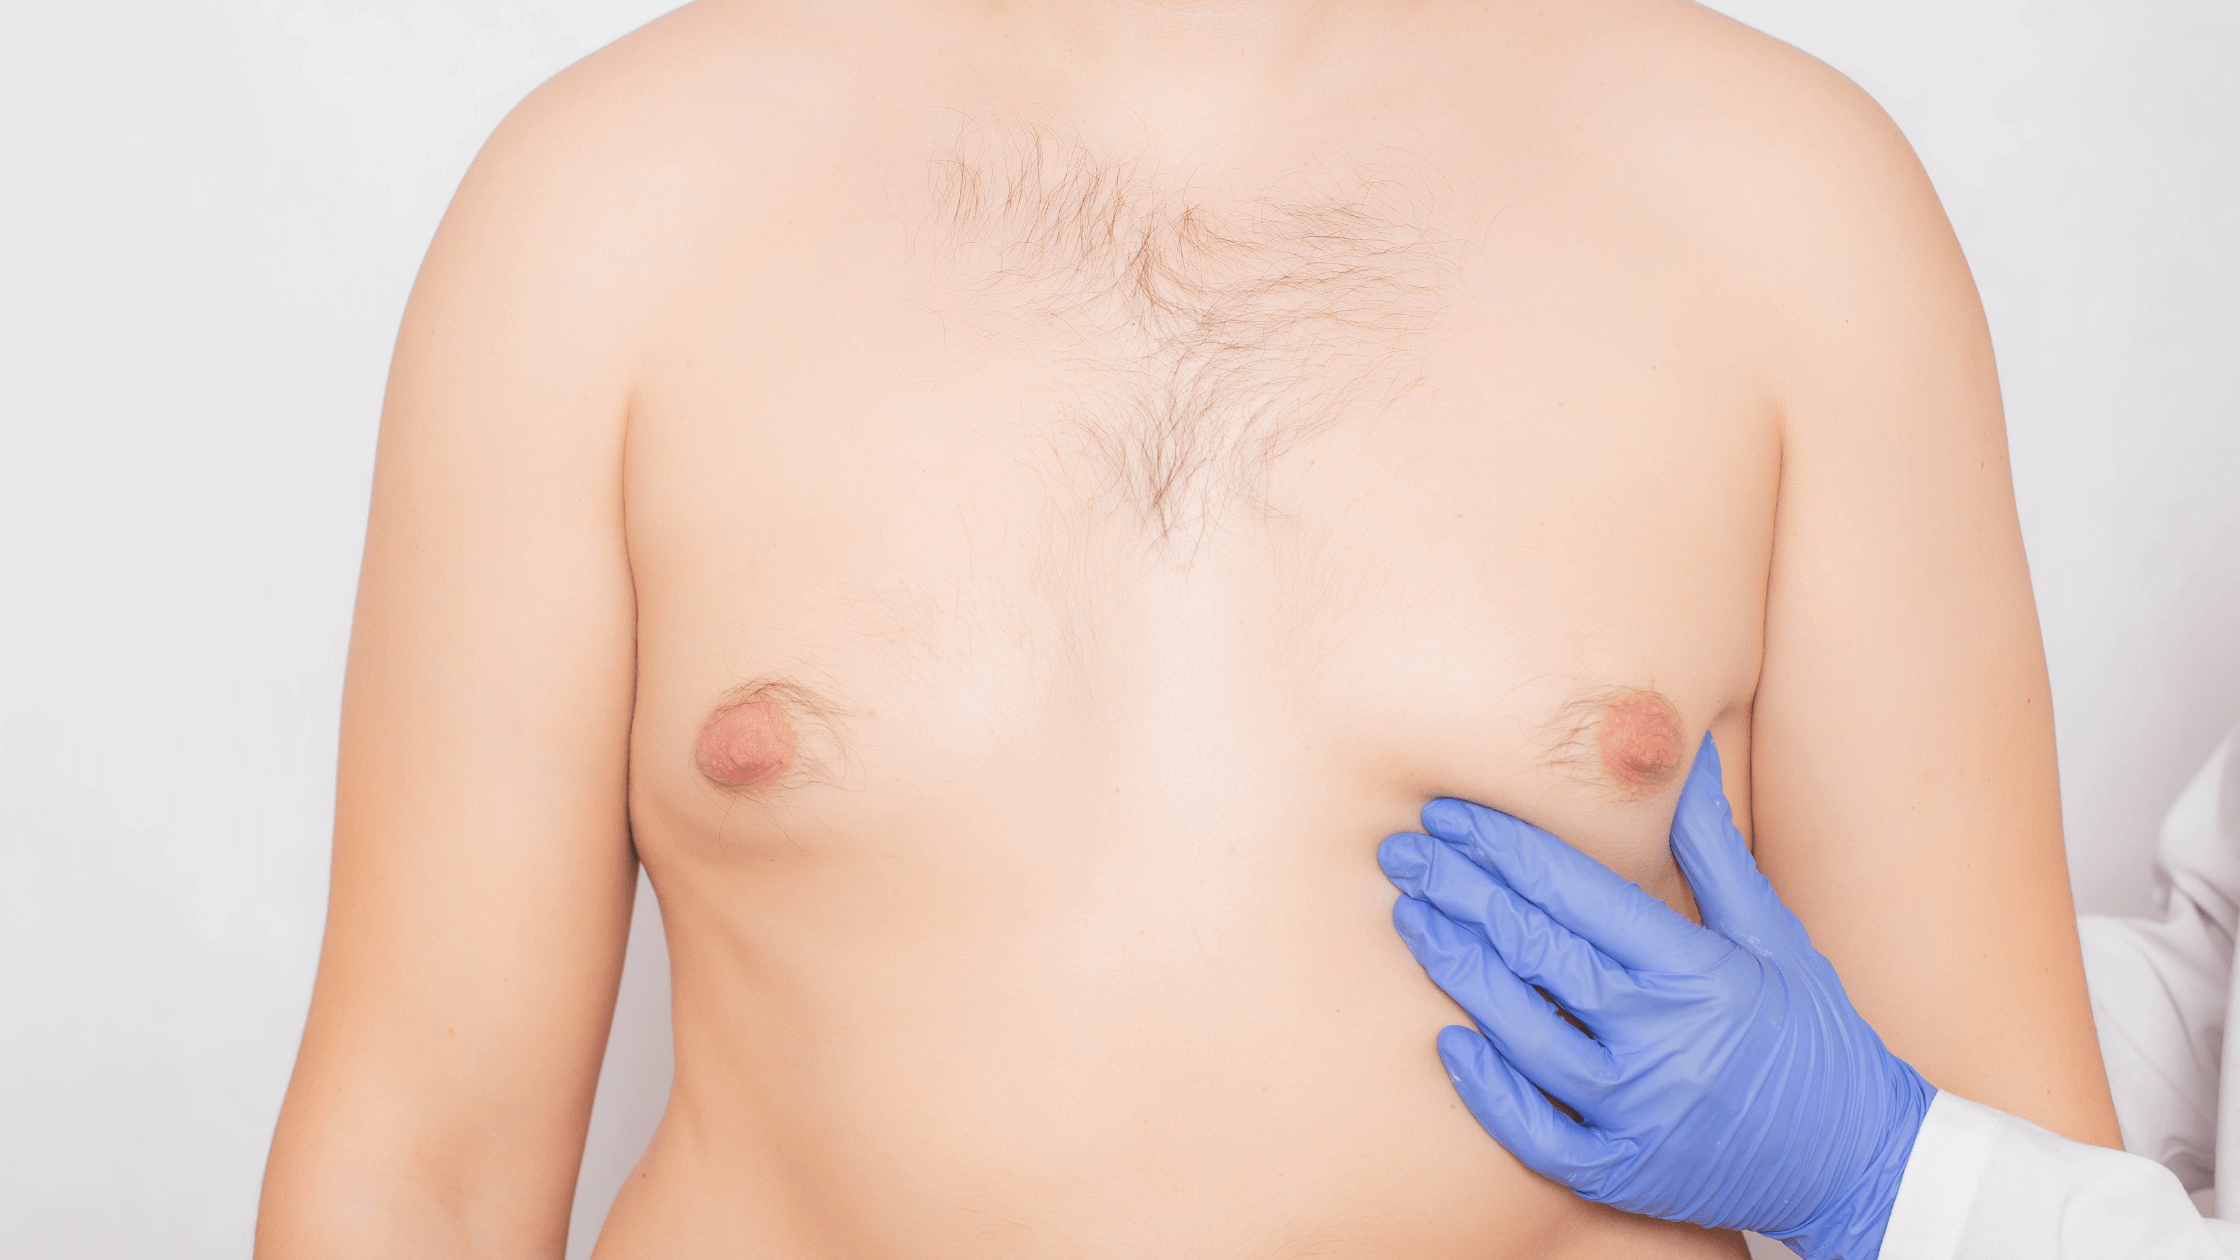 How Can Male Breast Reduction Surgery Tackle Gynecomastia?